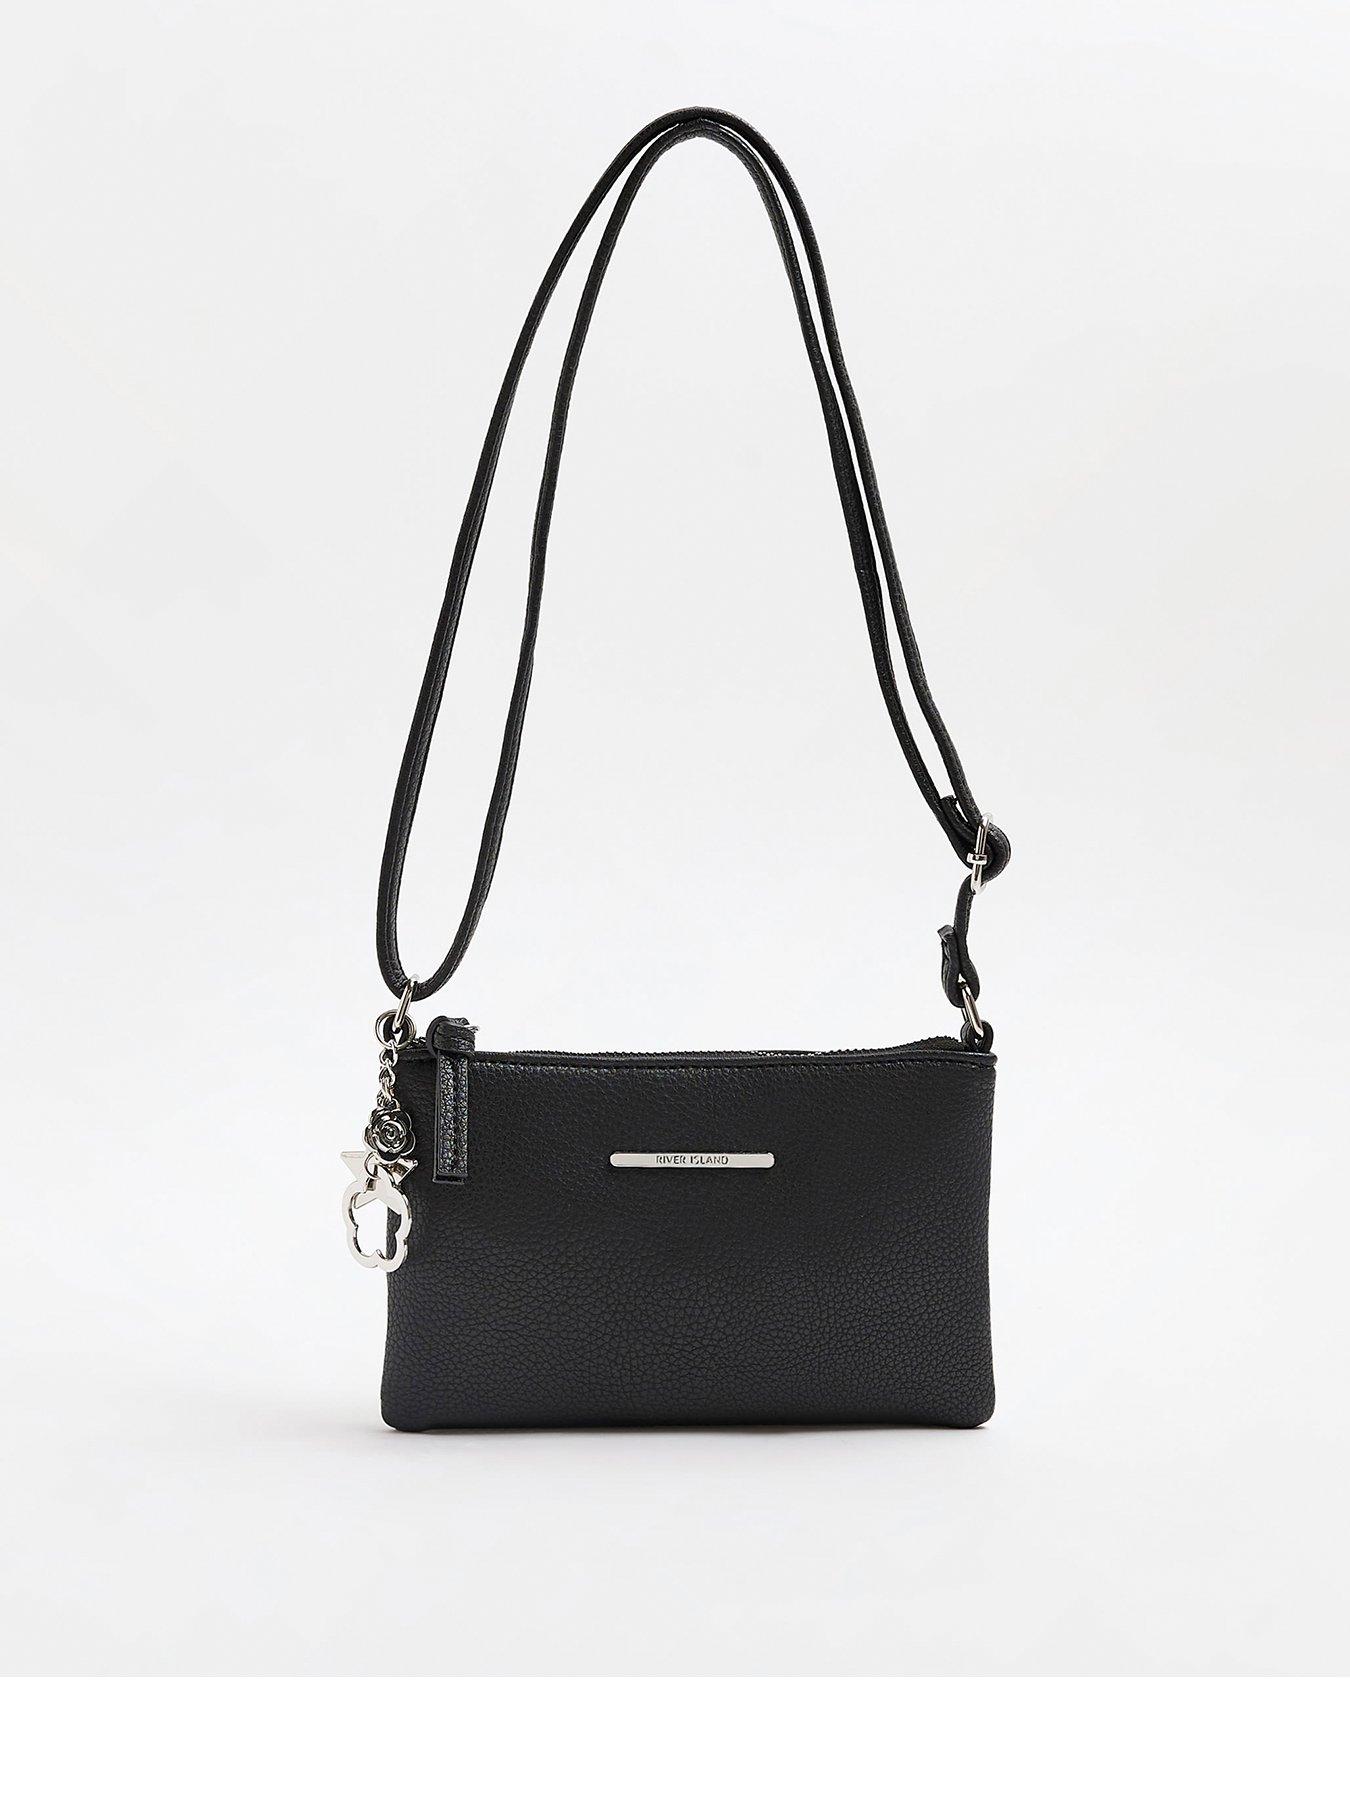 River Island Pocket And Chain Front Monogram Cross-body Bag in Black